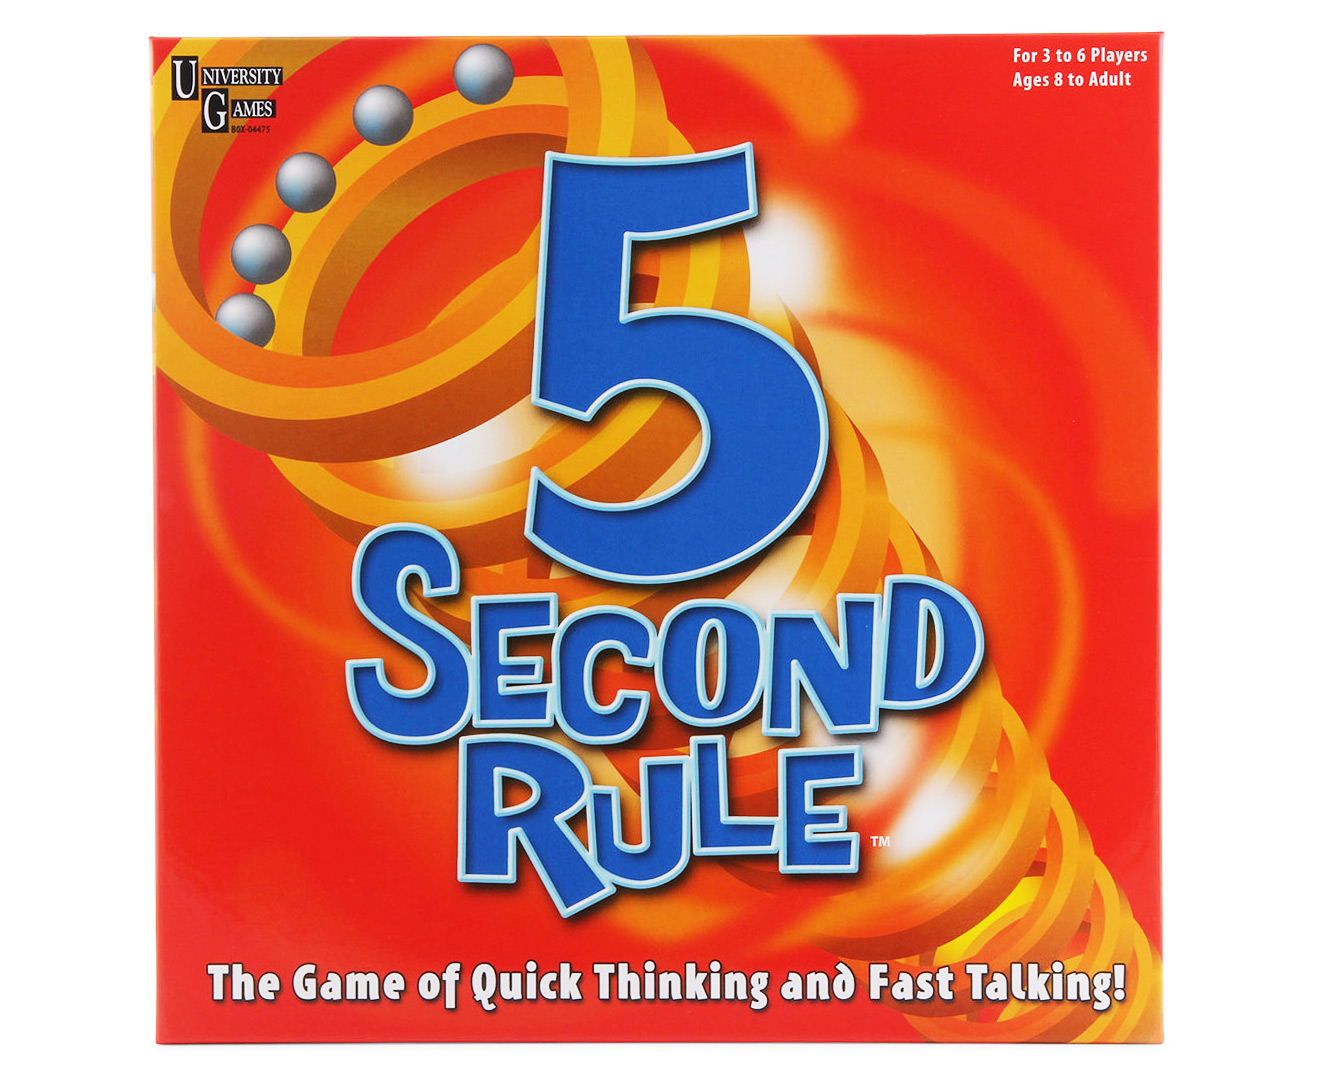 5 second rule board game rules pass on